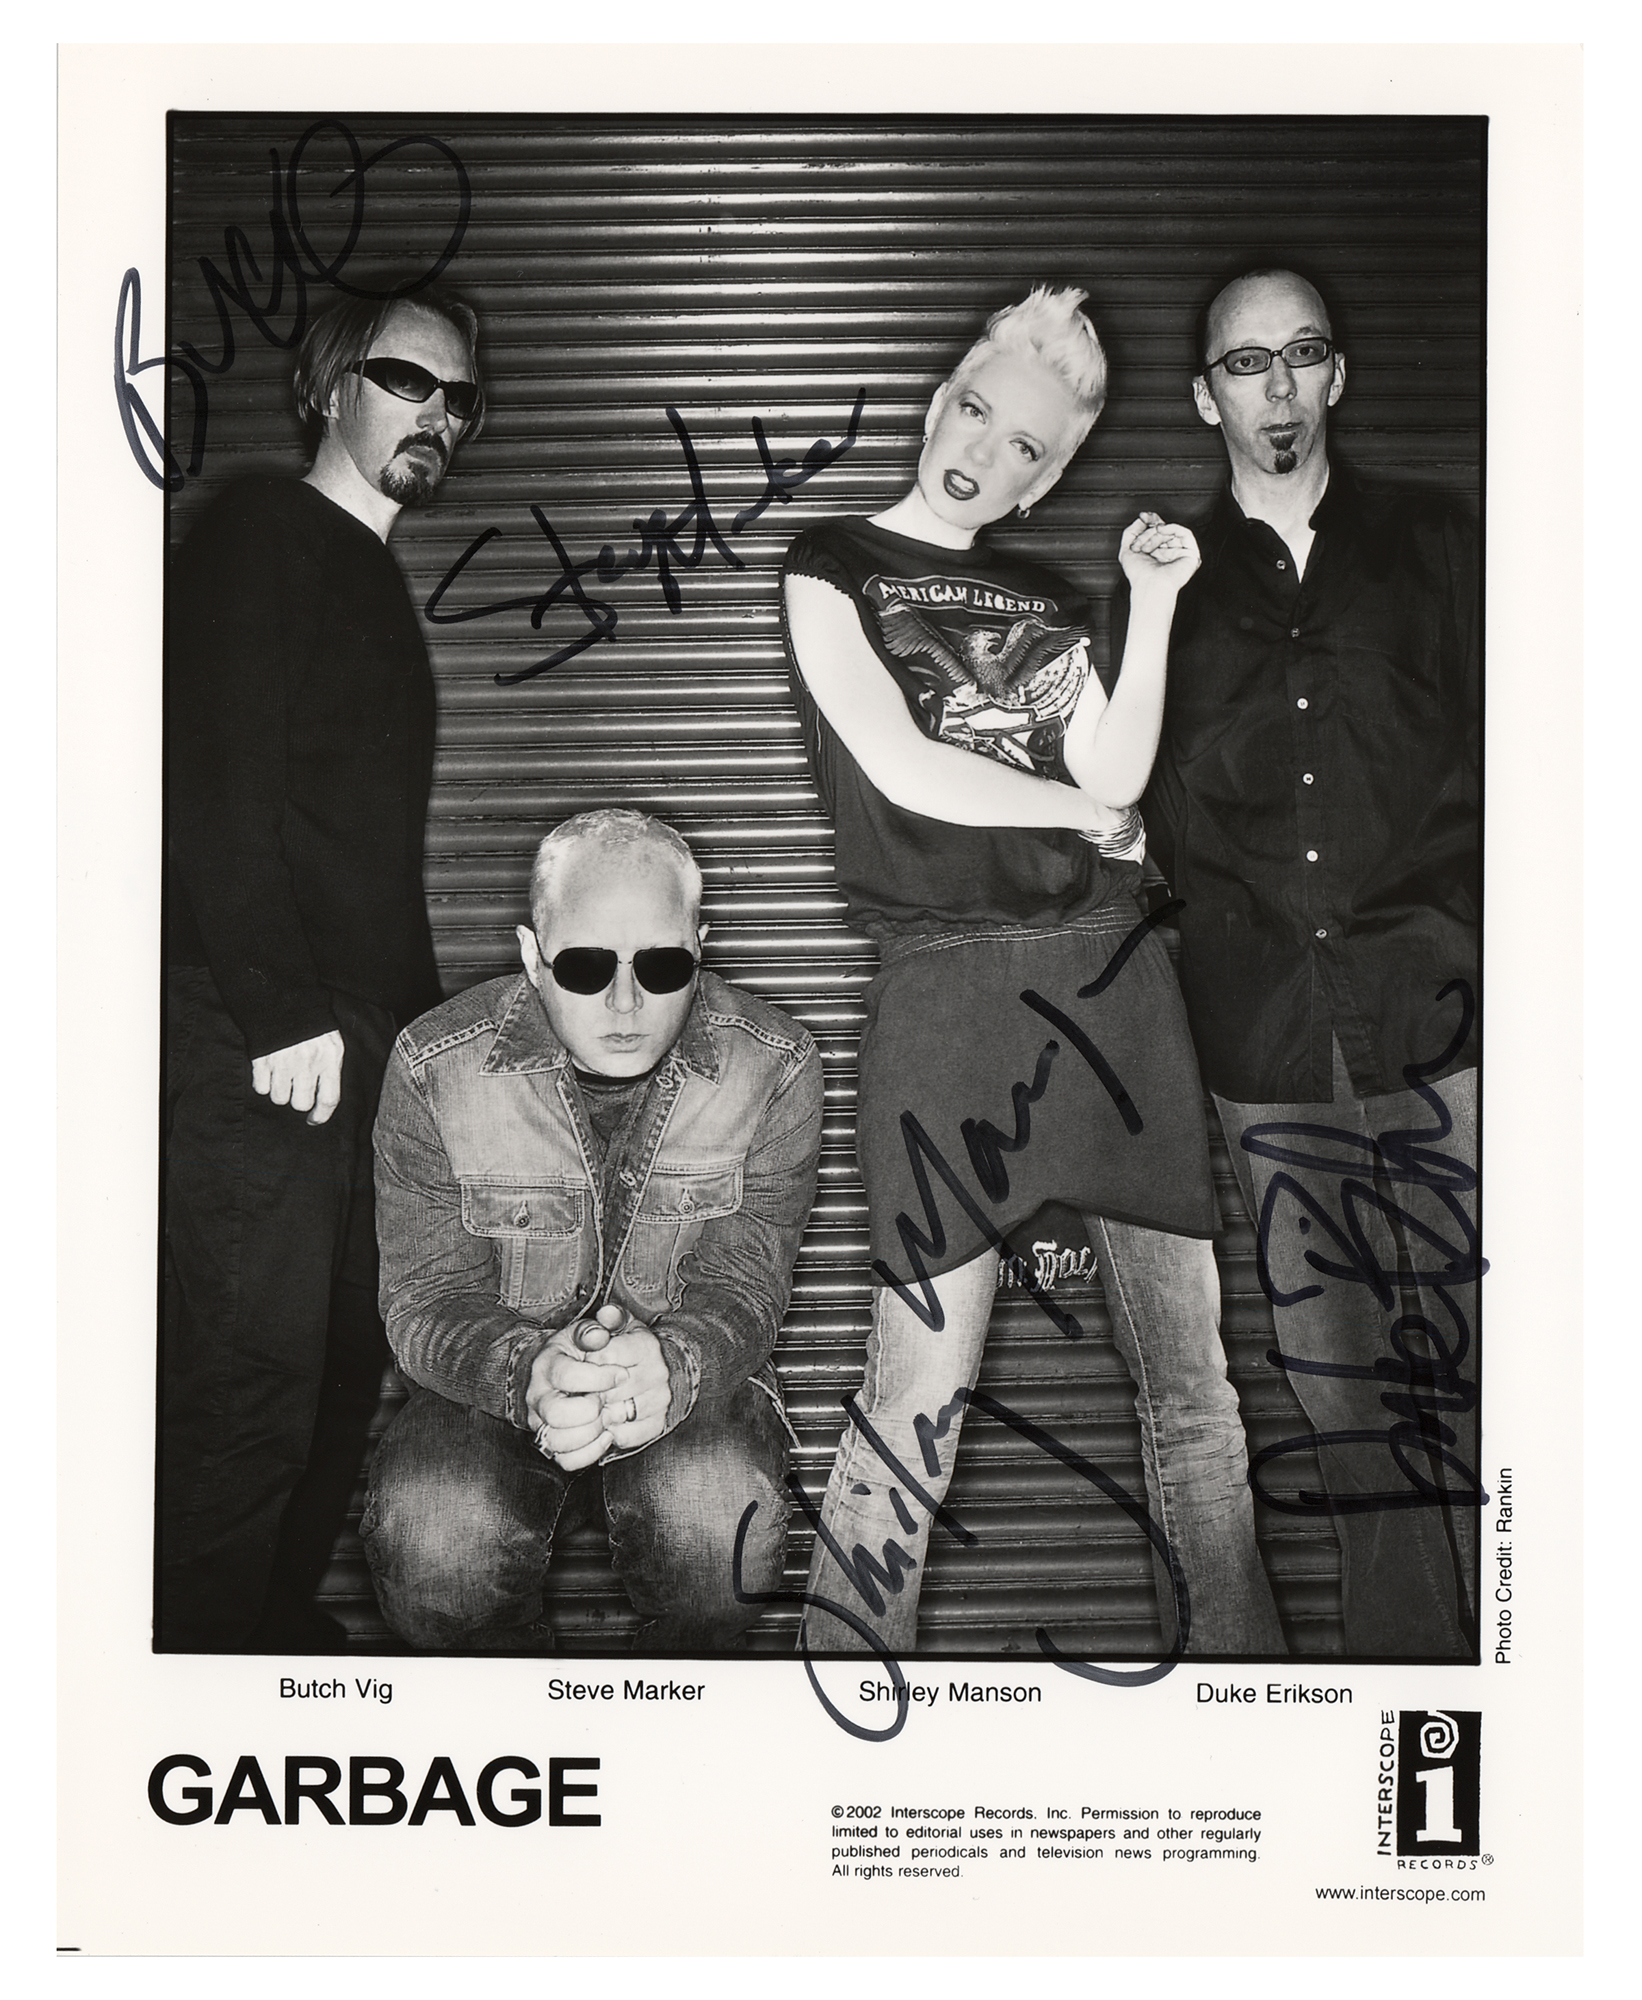 Lot #615 Garbage Signed Photograph